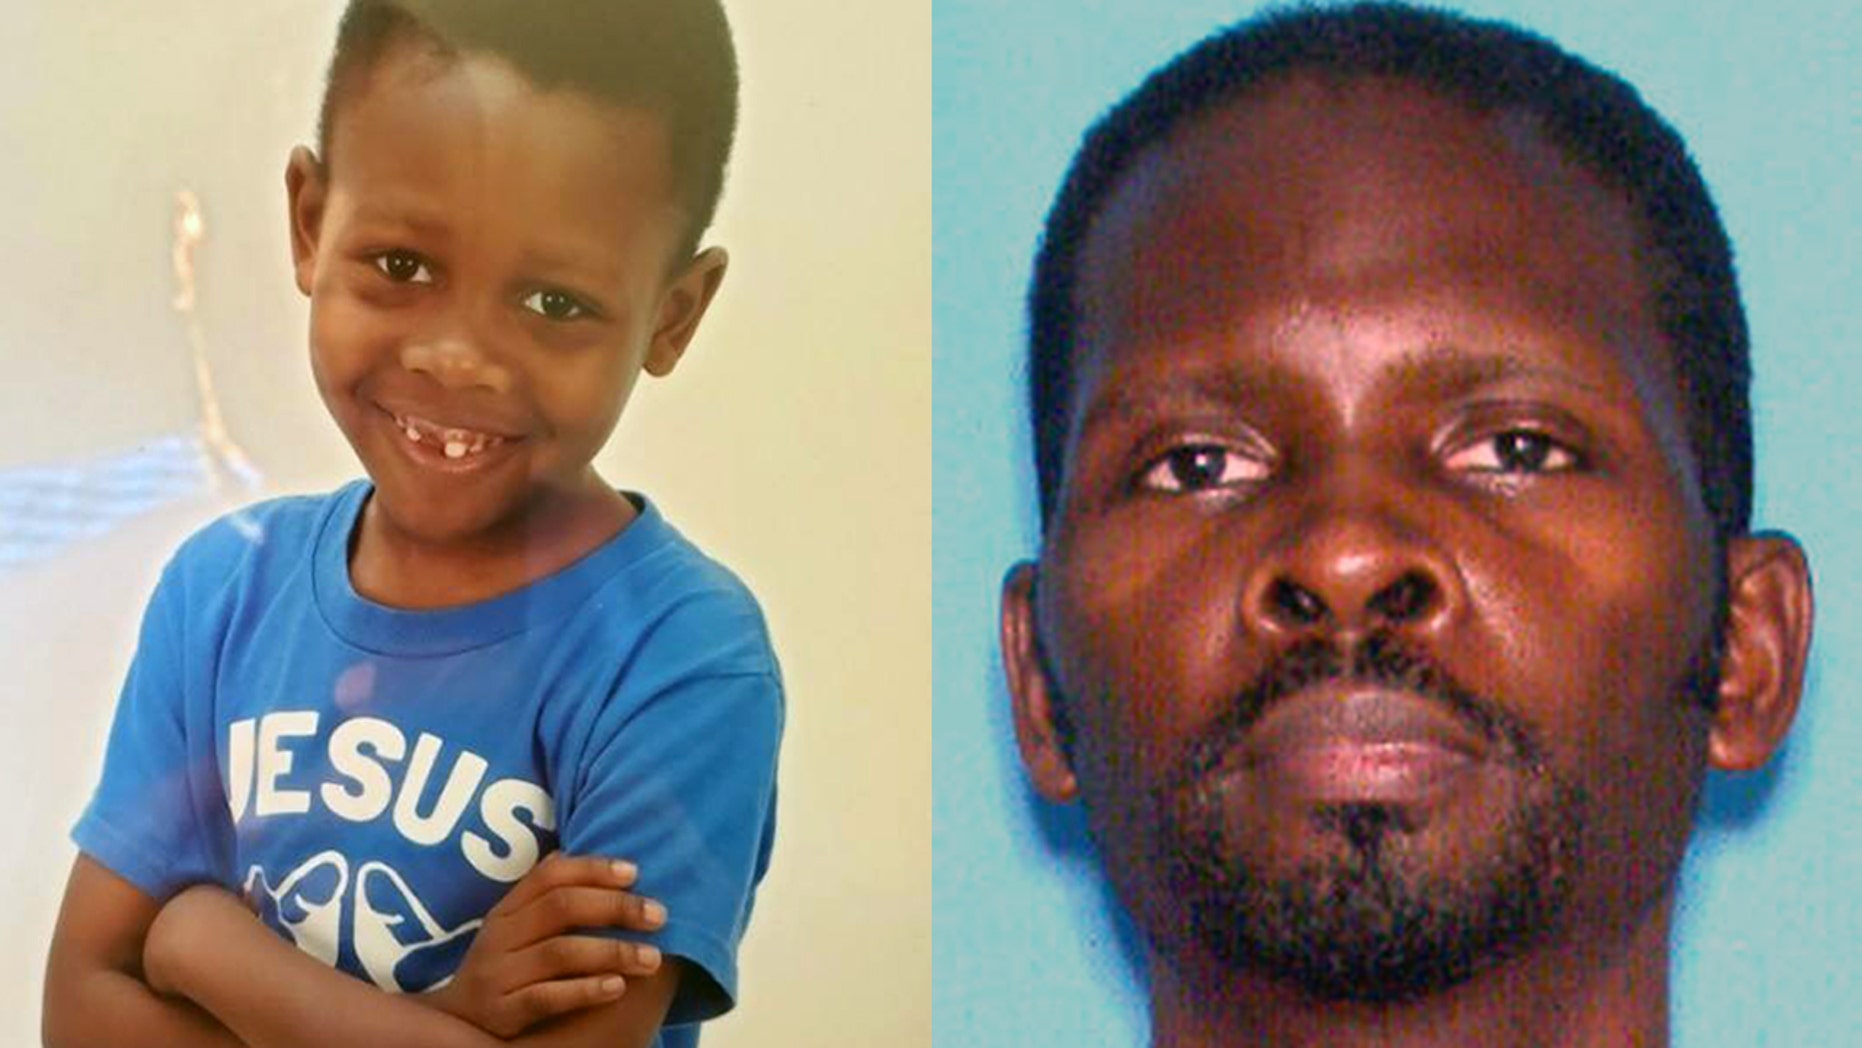 Joshua Graham was seen in Florida with his father, Kenneth, police said.